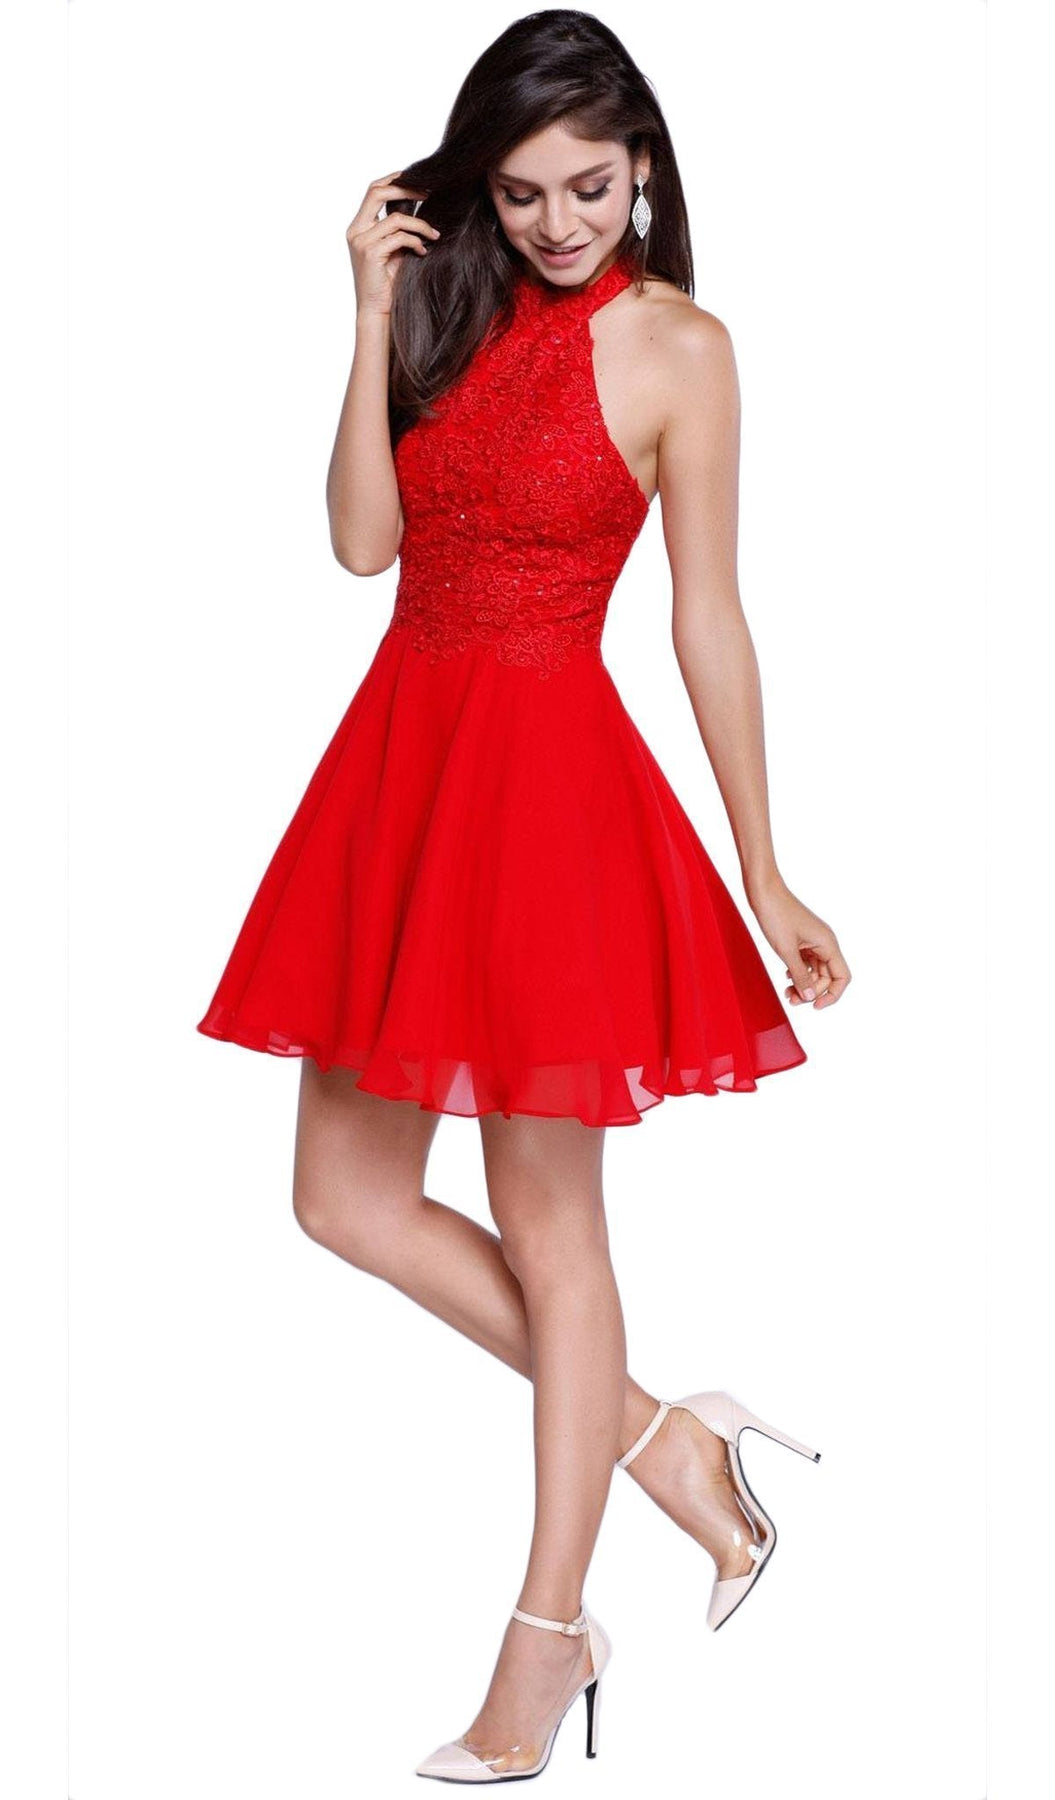 Nox Anabel - 6210 Lace Halter Neck Dress Special Occasion Dress XS / Red